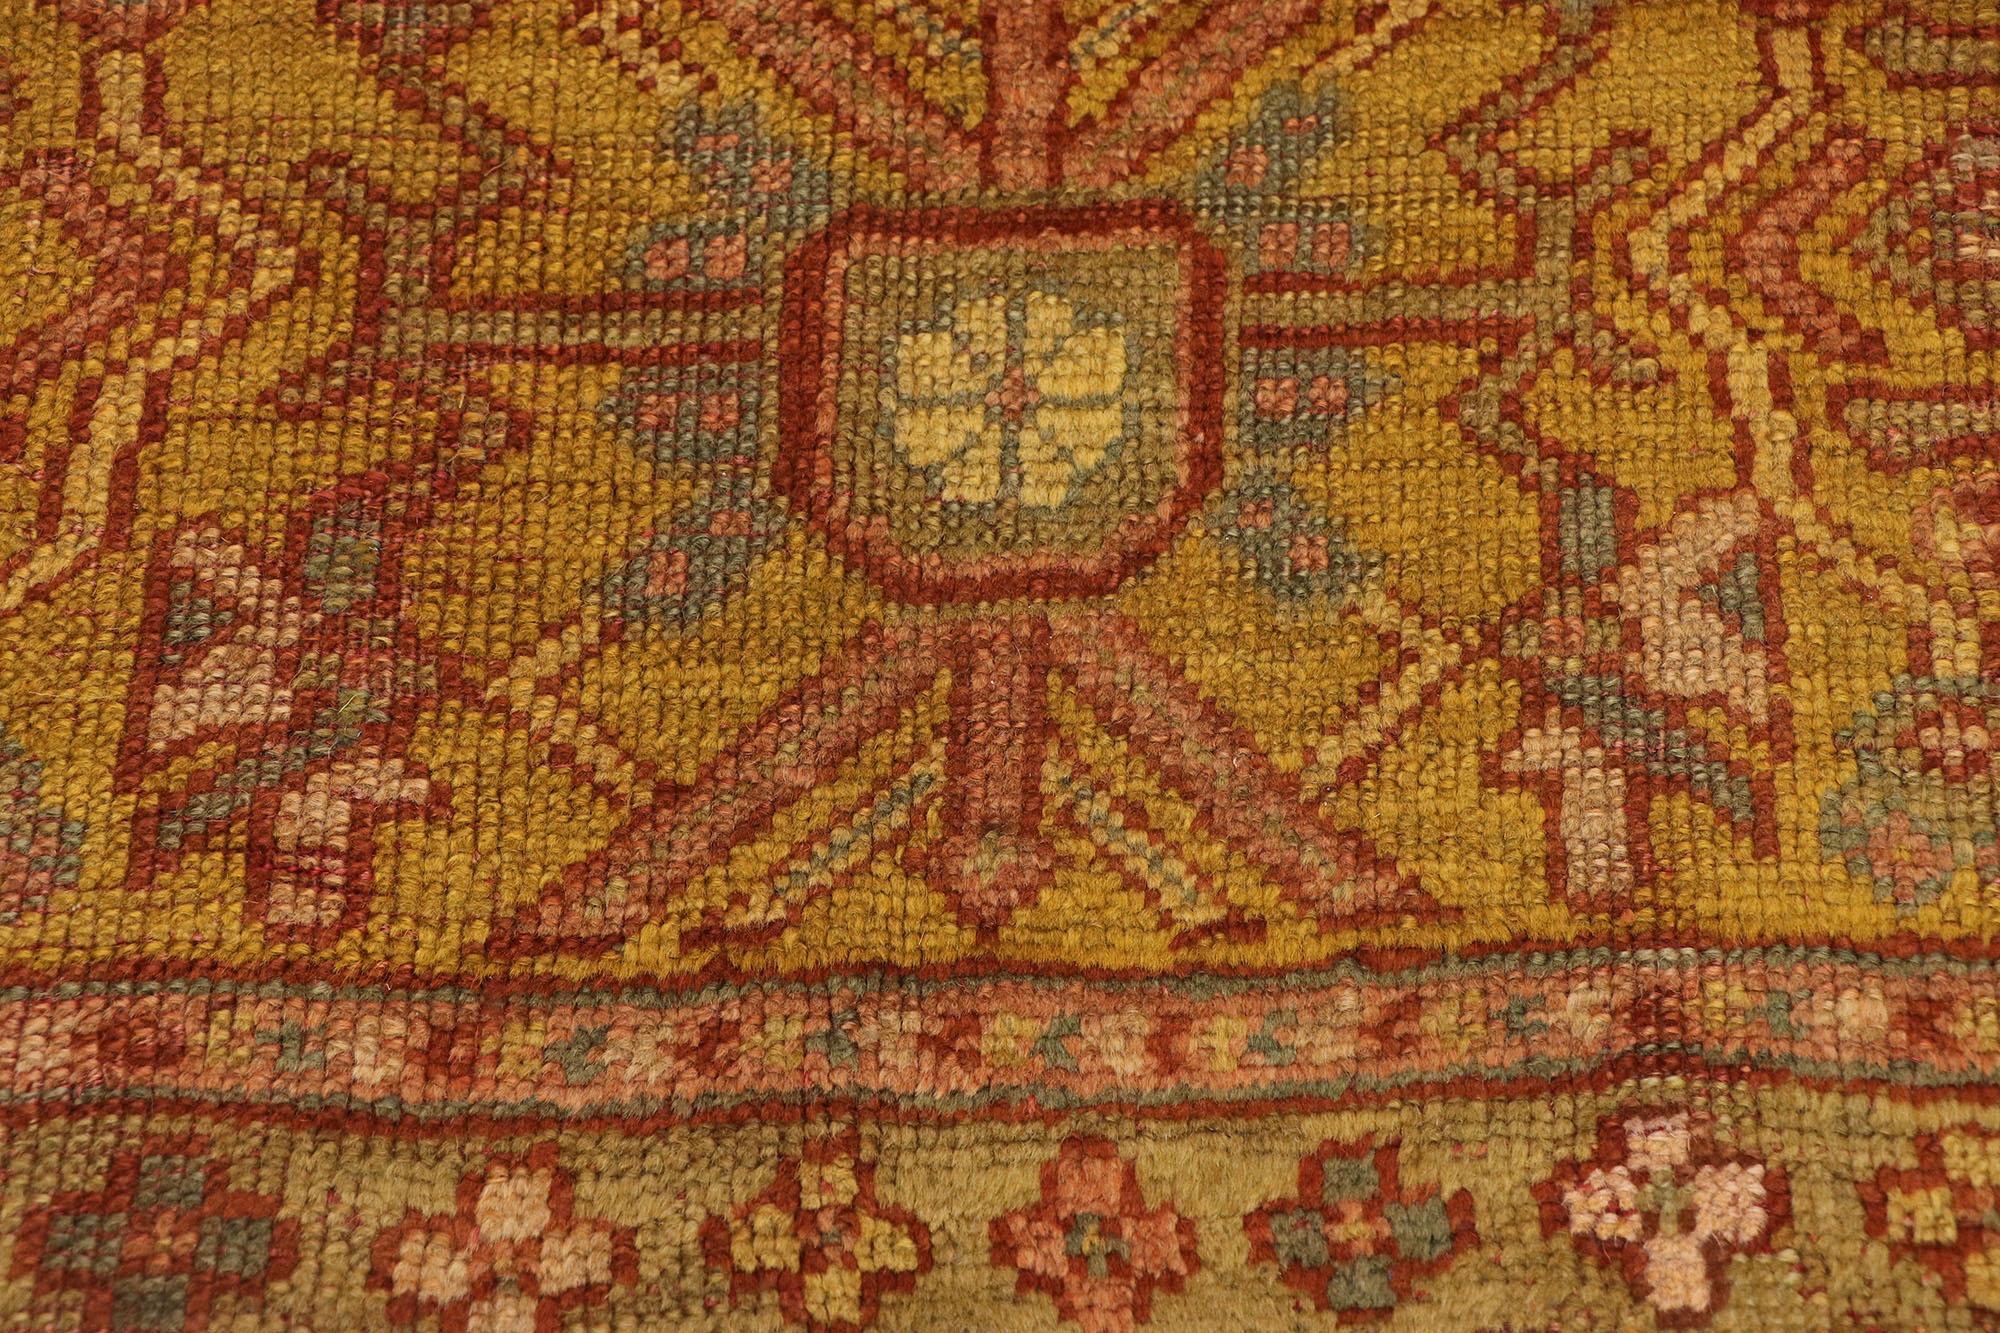 Antique Turkish Oushak Rug with Rustic Arts & Crafts Style In Good Condition For Sale In Dallas, TX